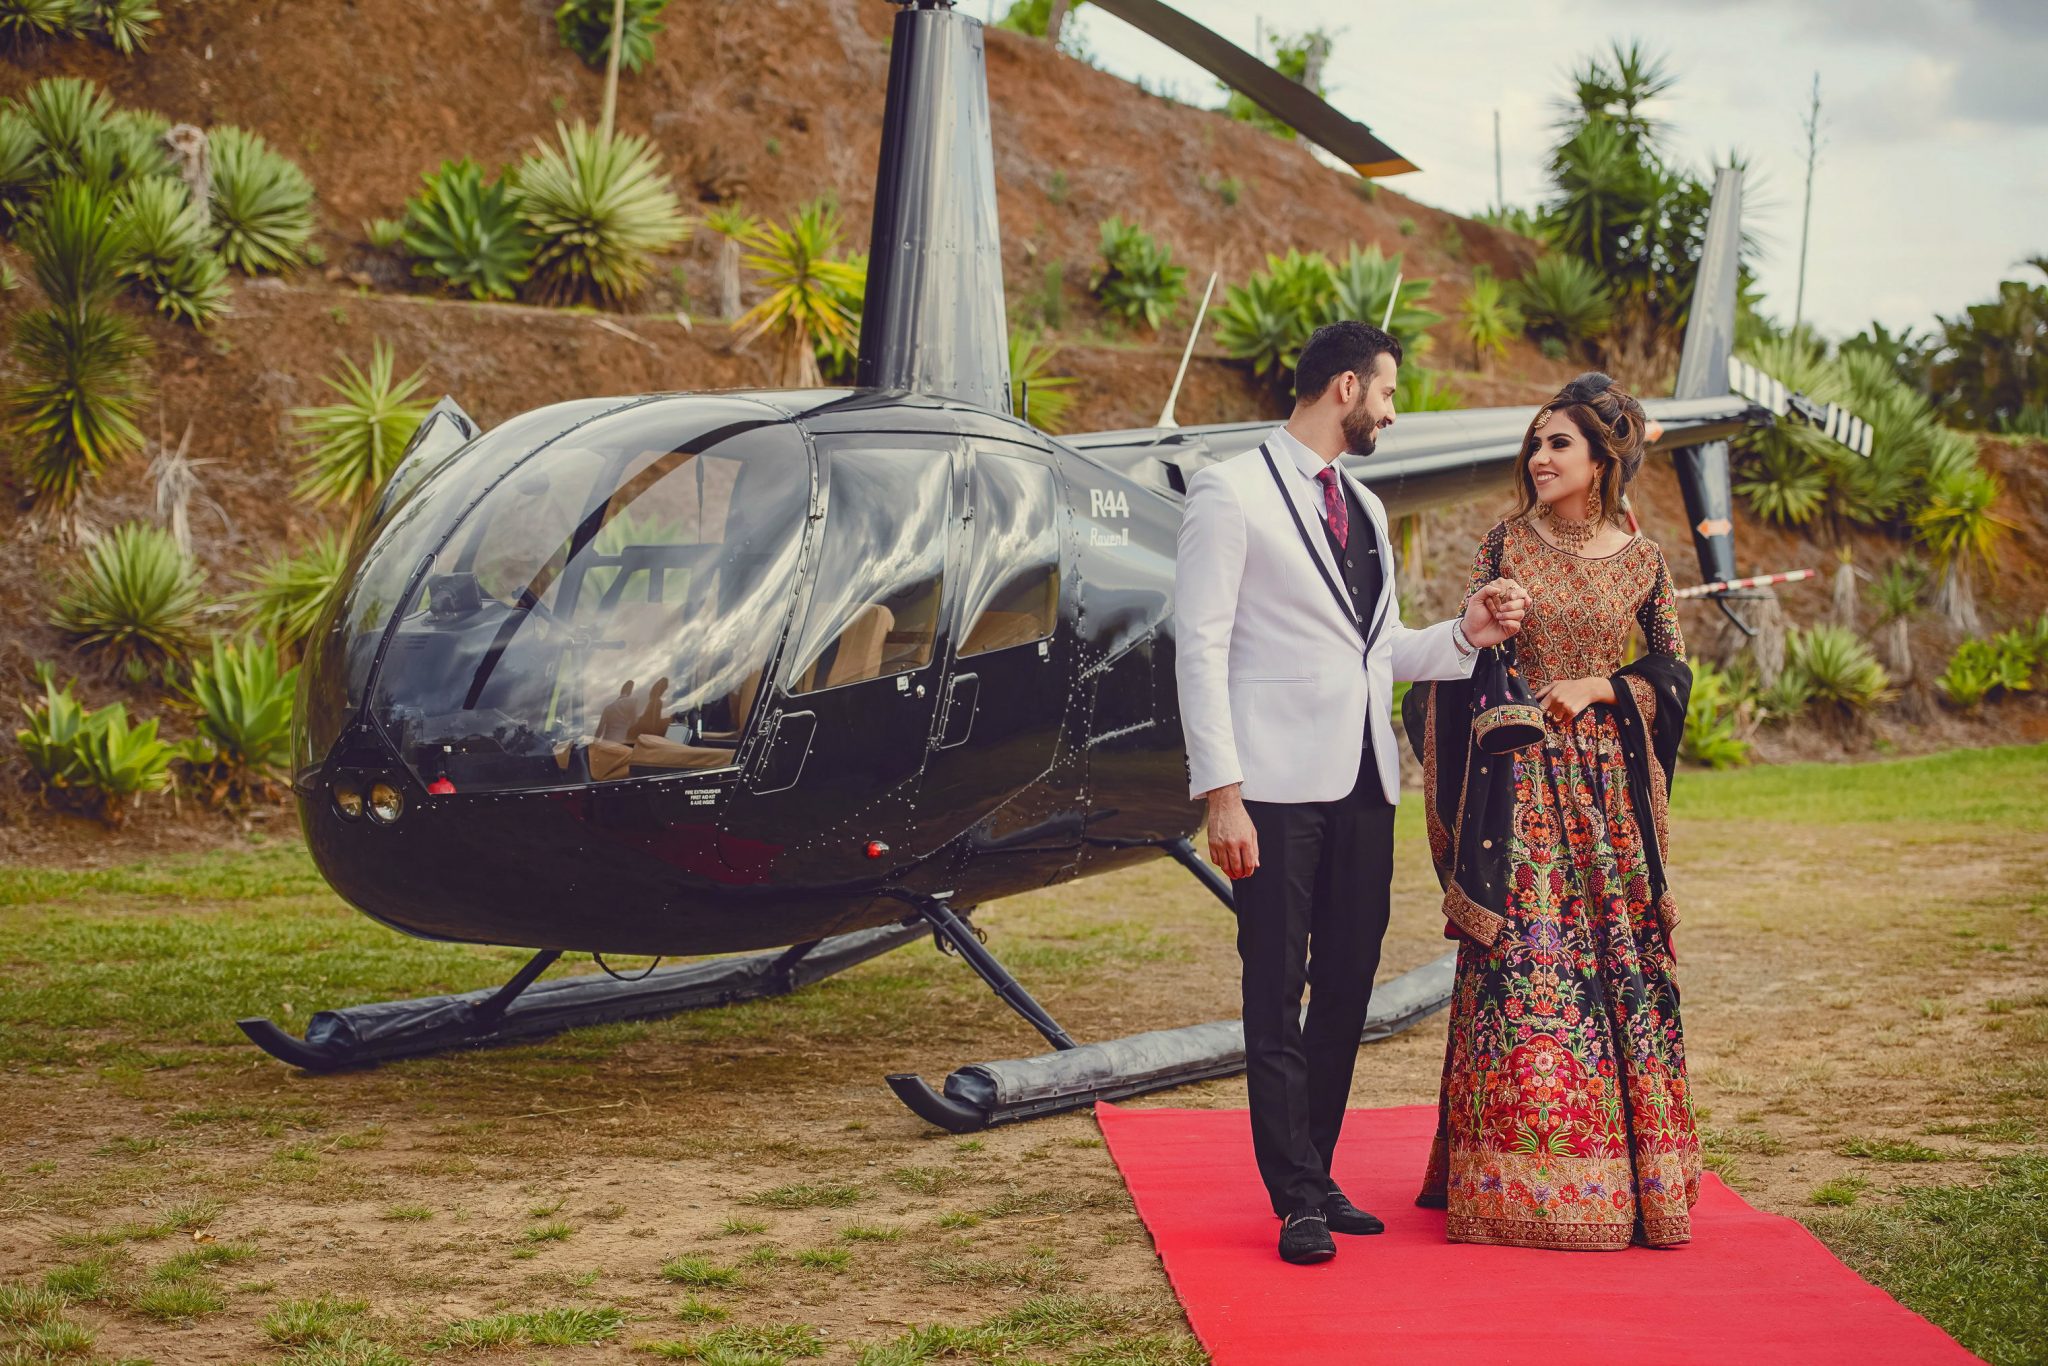 The Groom and Bride are standing in front of the black helicopter